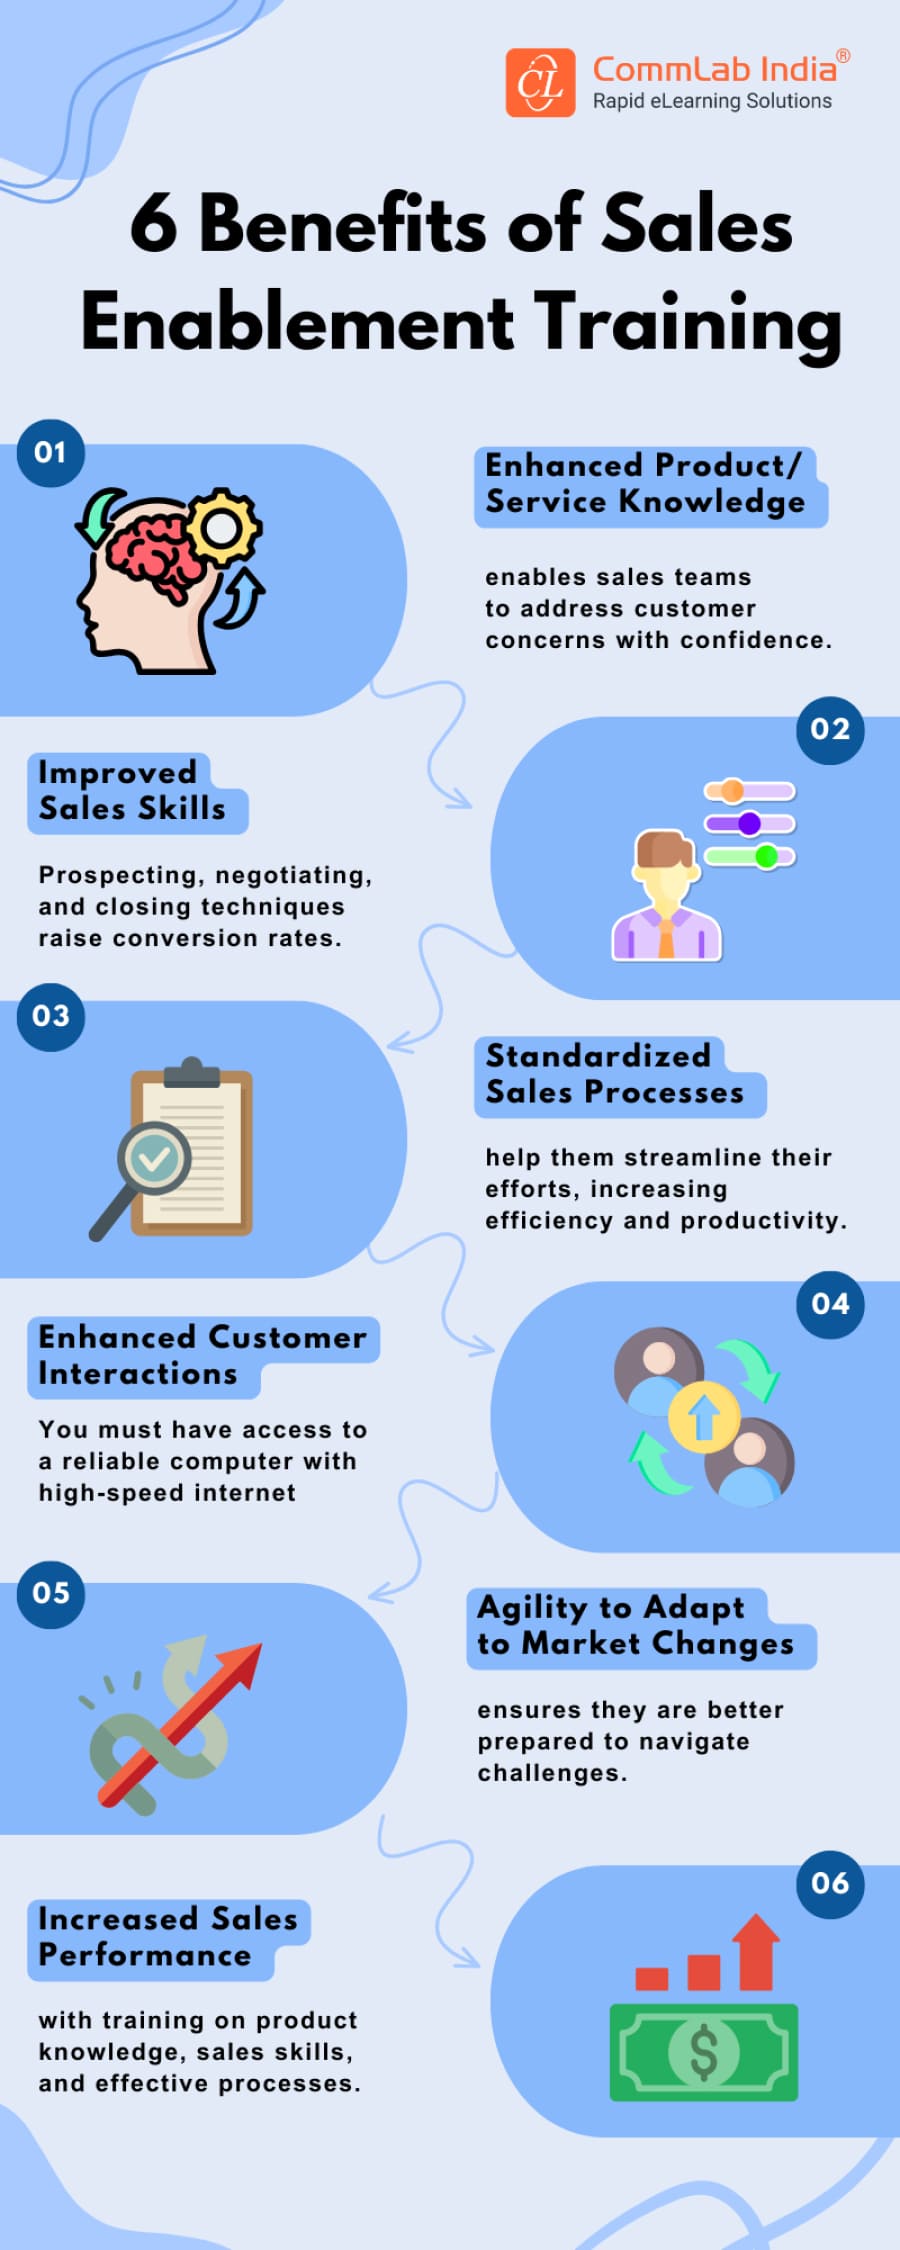 6 Benefits of Sales Enablement Training